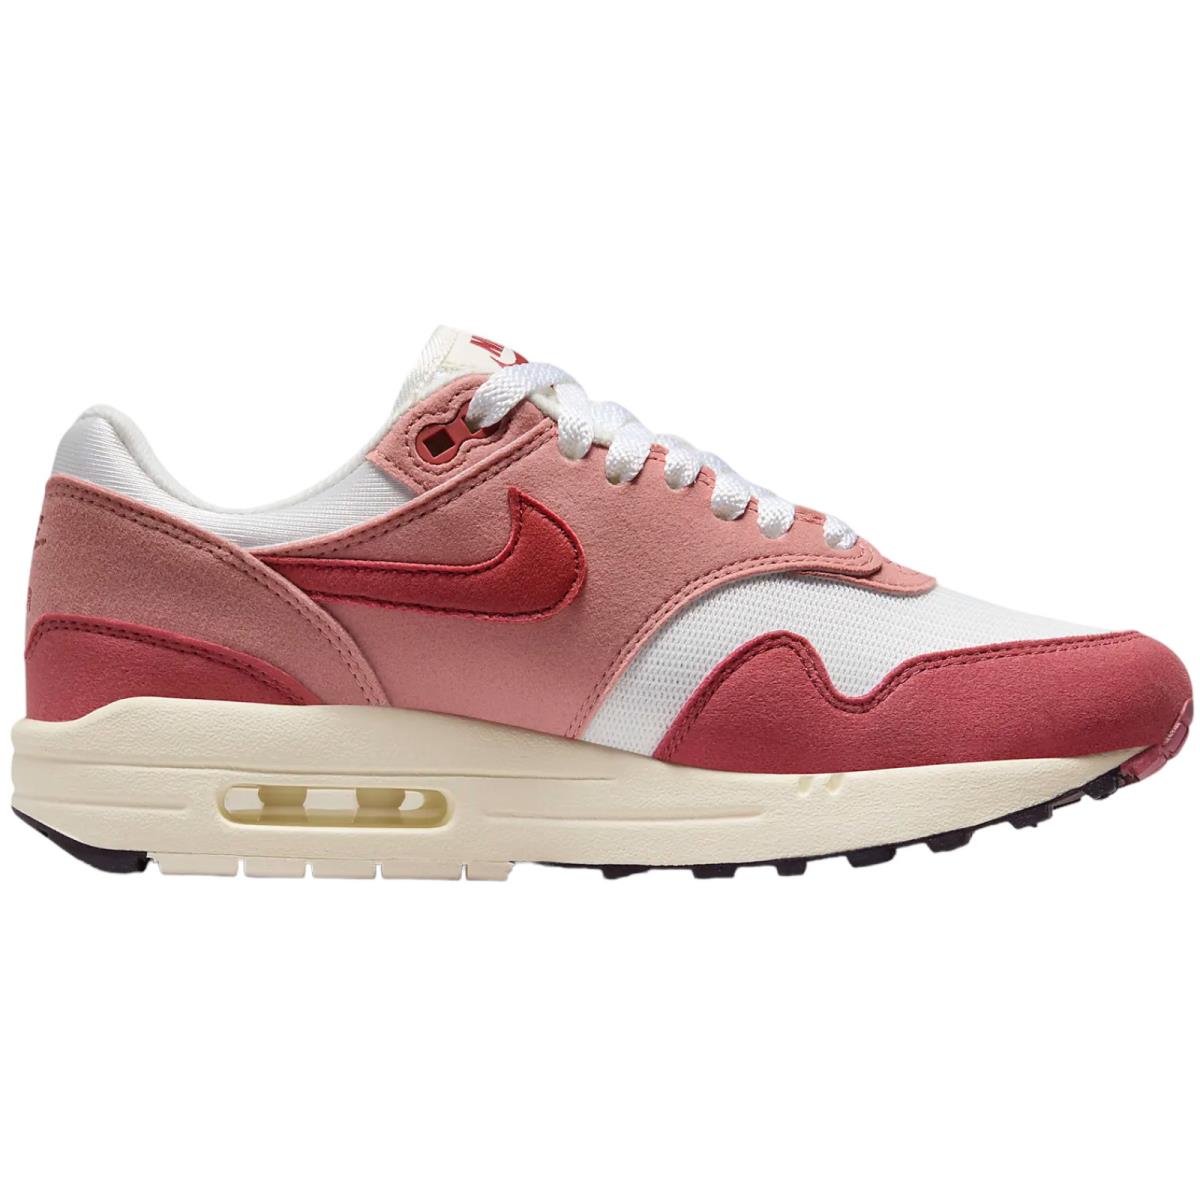 Nike Air Max 1 Women`s Casual Shoes All Colors US Sizes 6-11 Sail/Red Stardust/Coconut Milk/Cedar